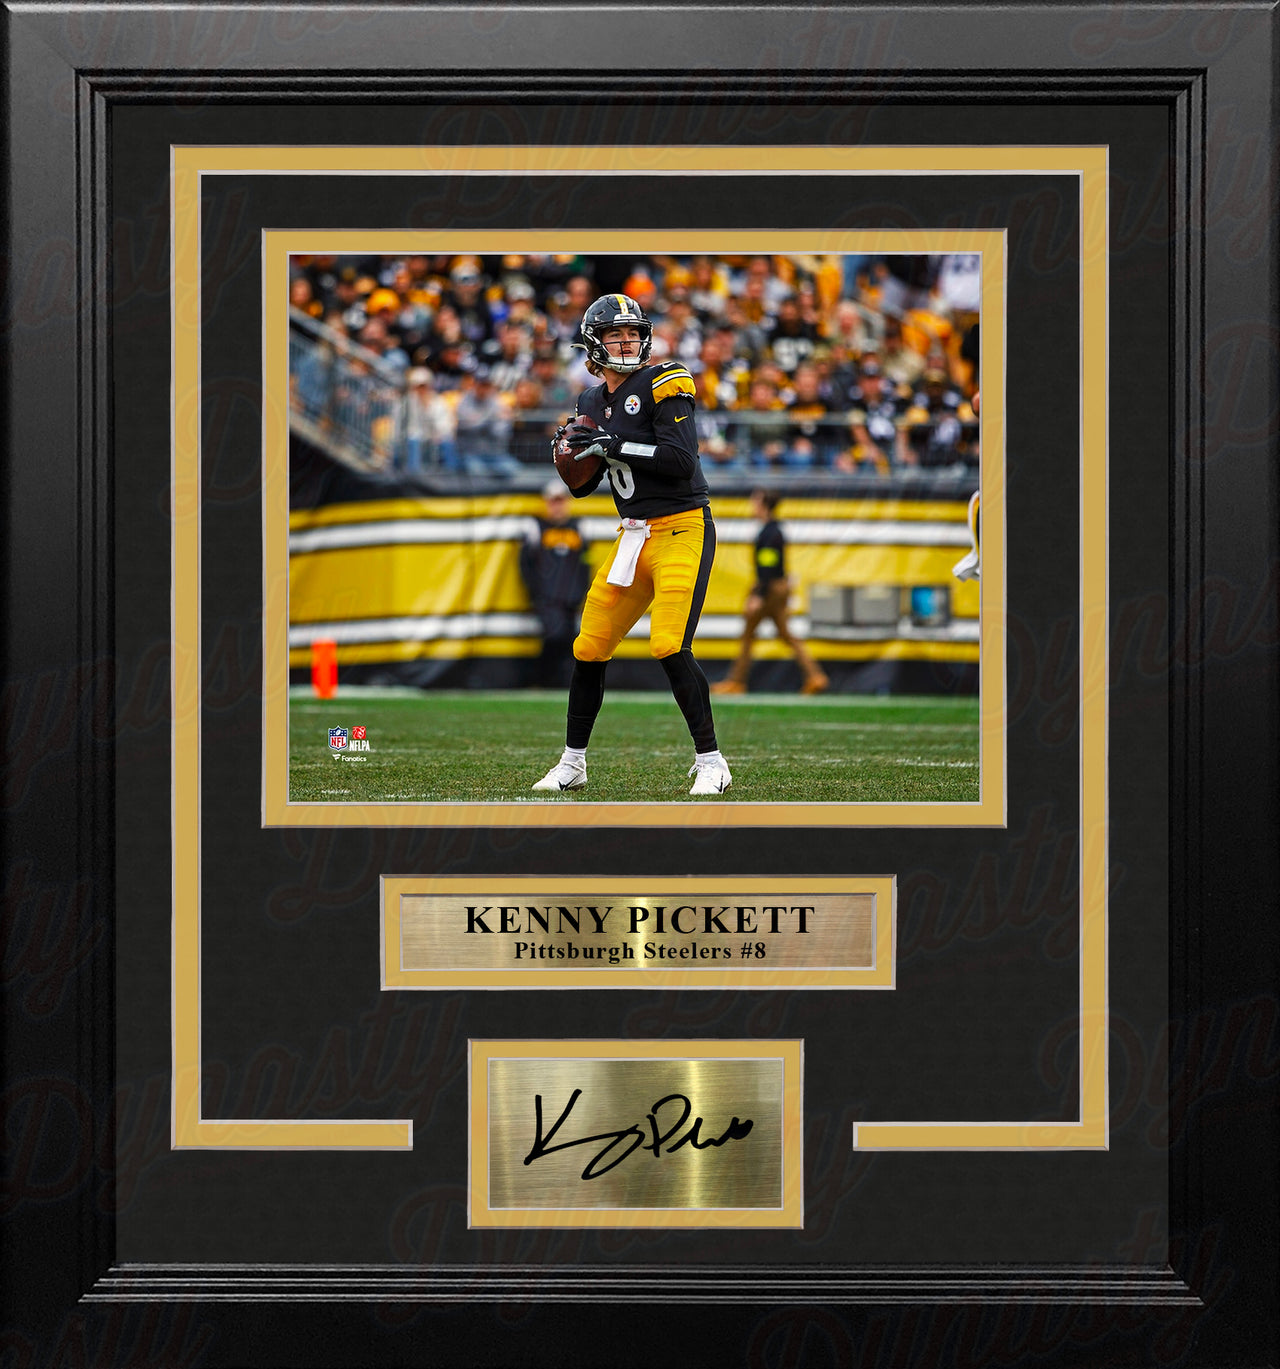 Kenny Pickett in Action Pittsburgh Steelers 8" x 10" Framed Football Photo with Engraved Autograph - Dynasty Sports & Framing 